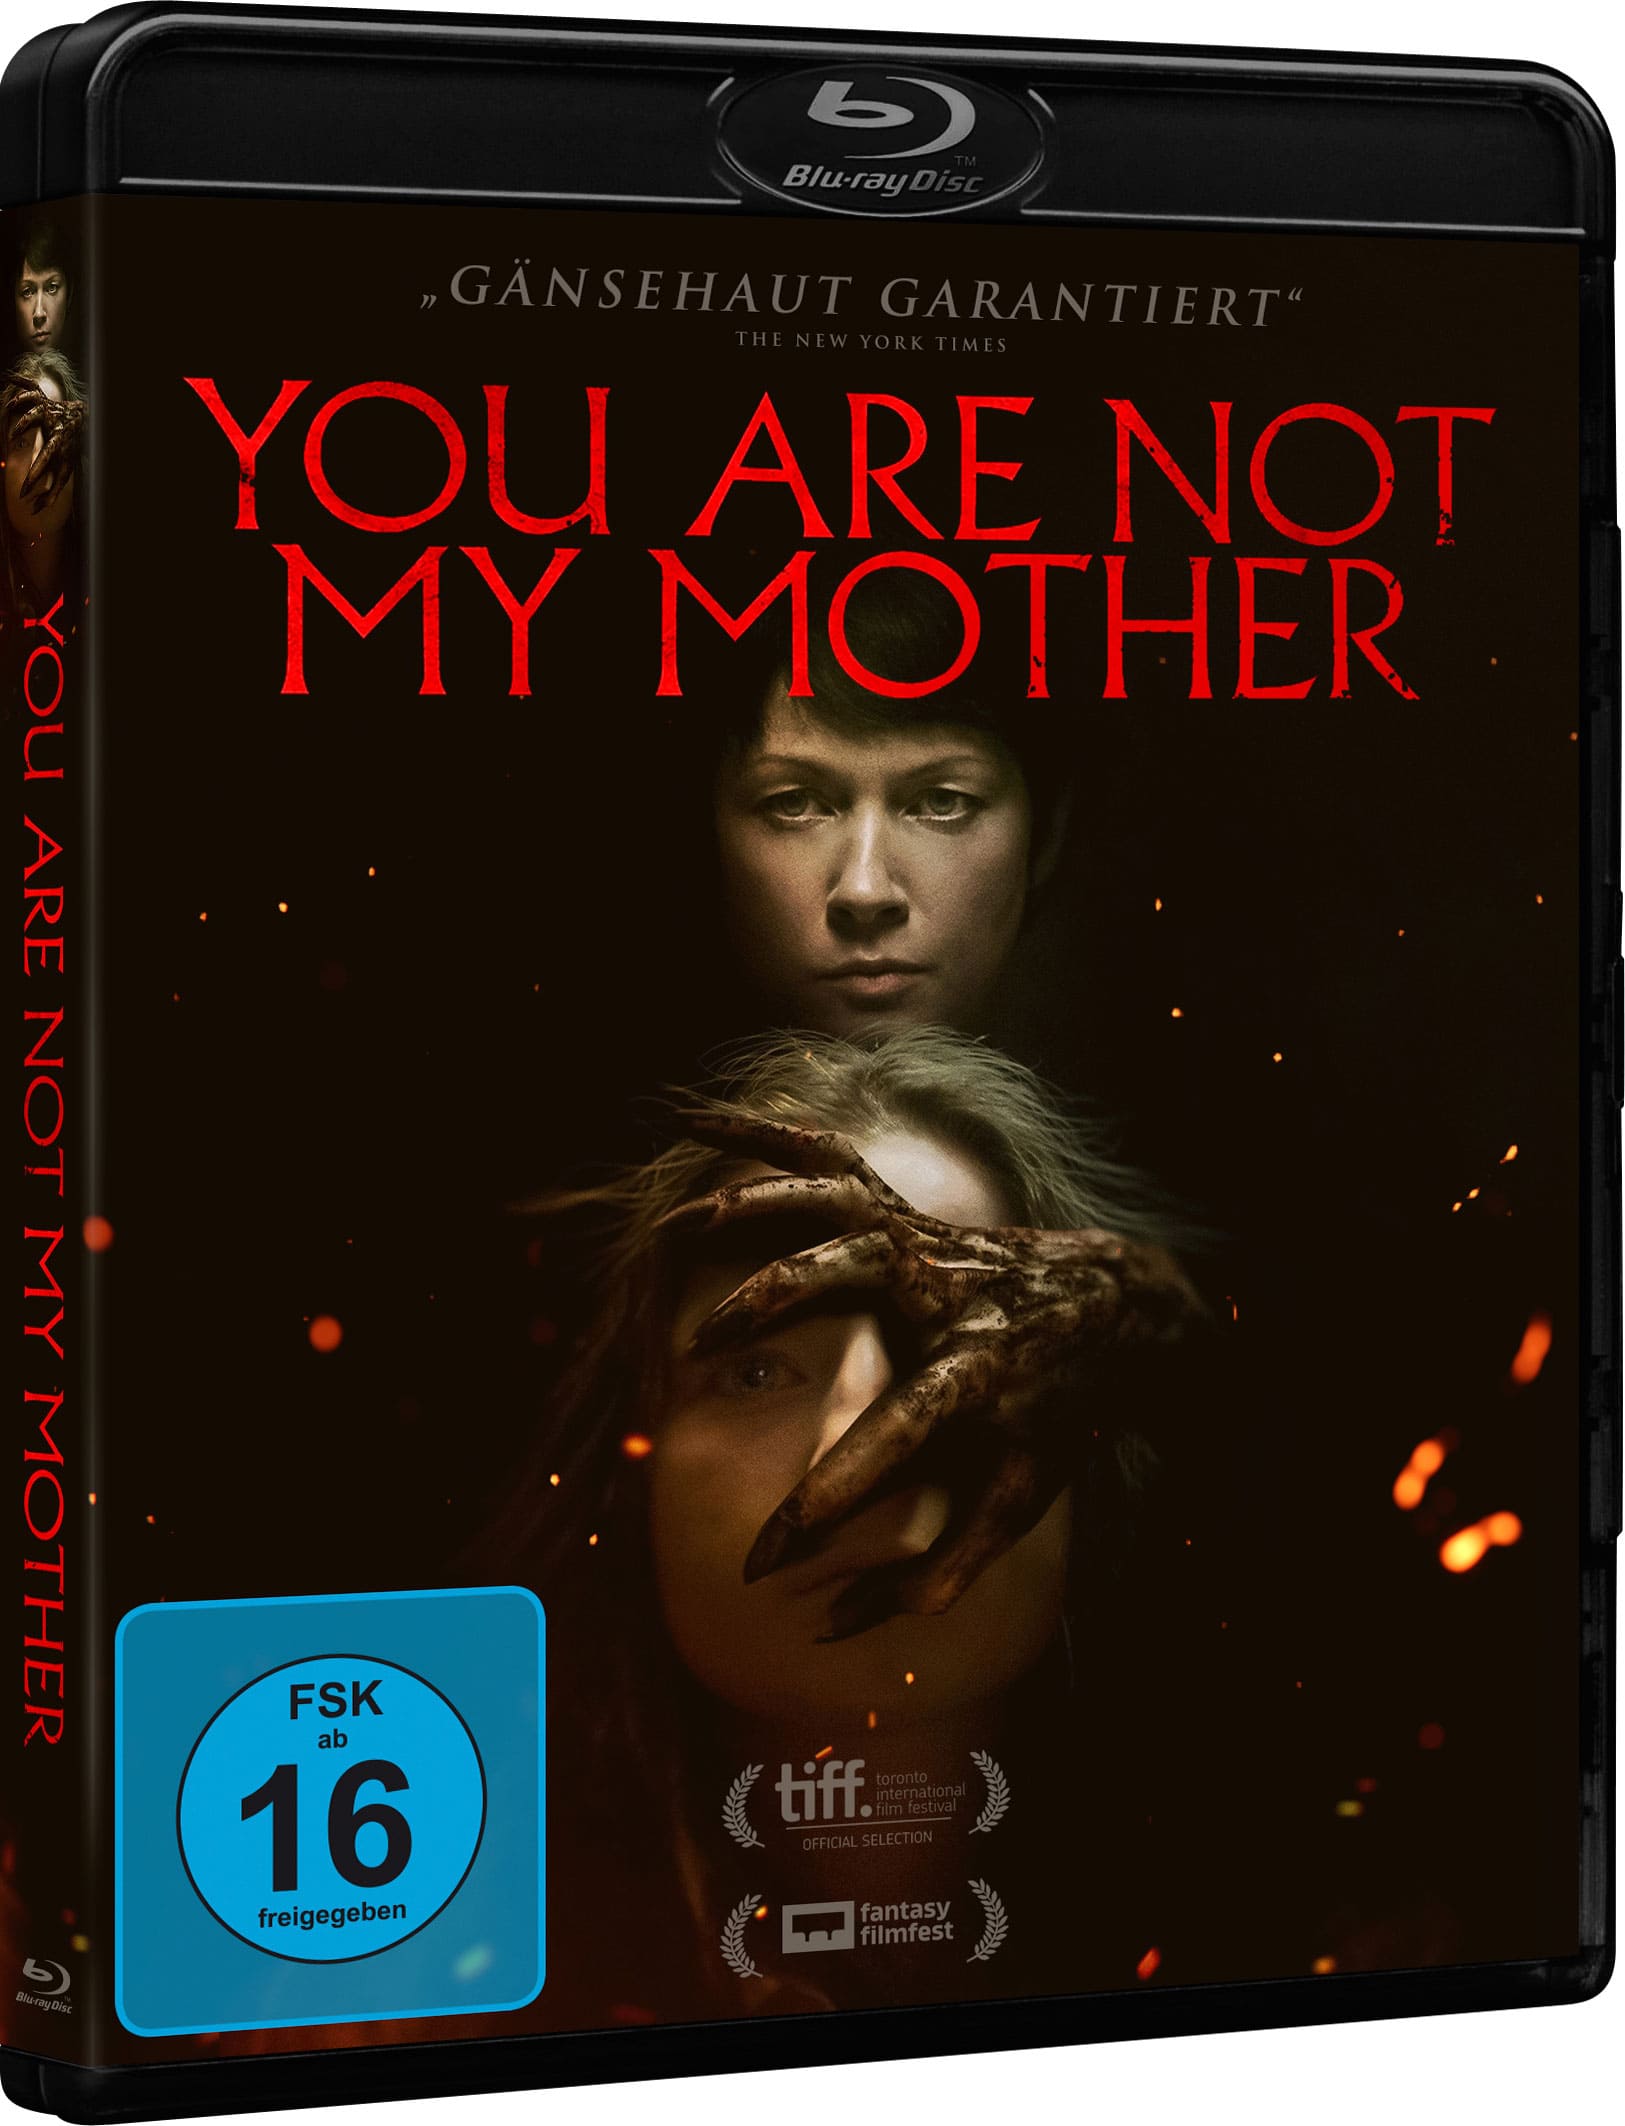 You Are Not My Mother (Blu-ray) Image 2